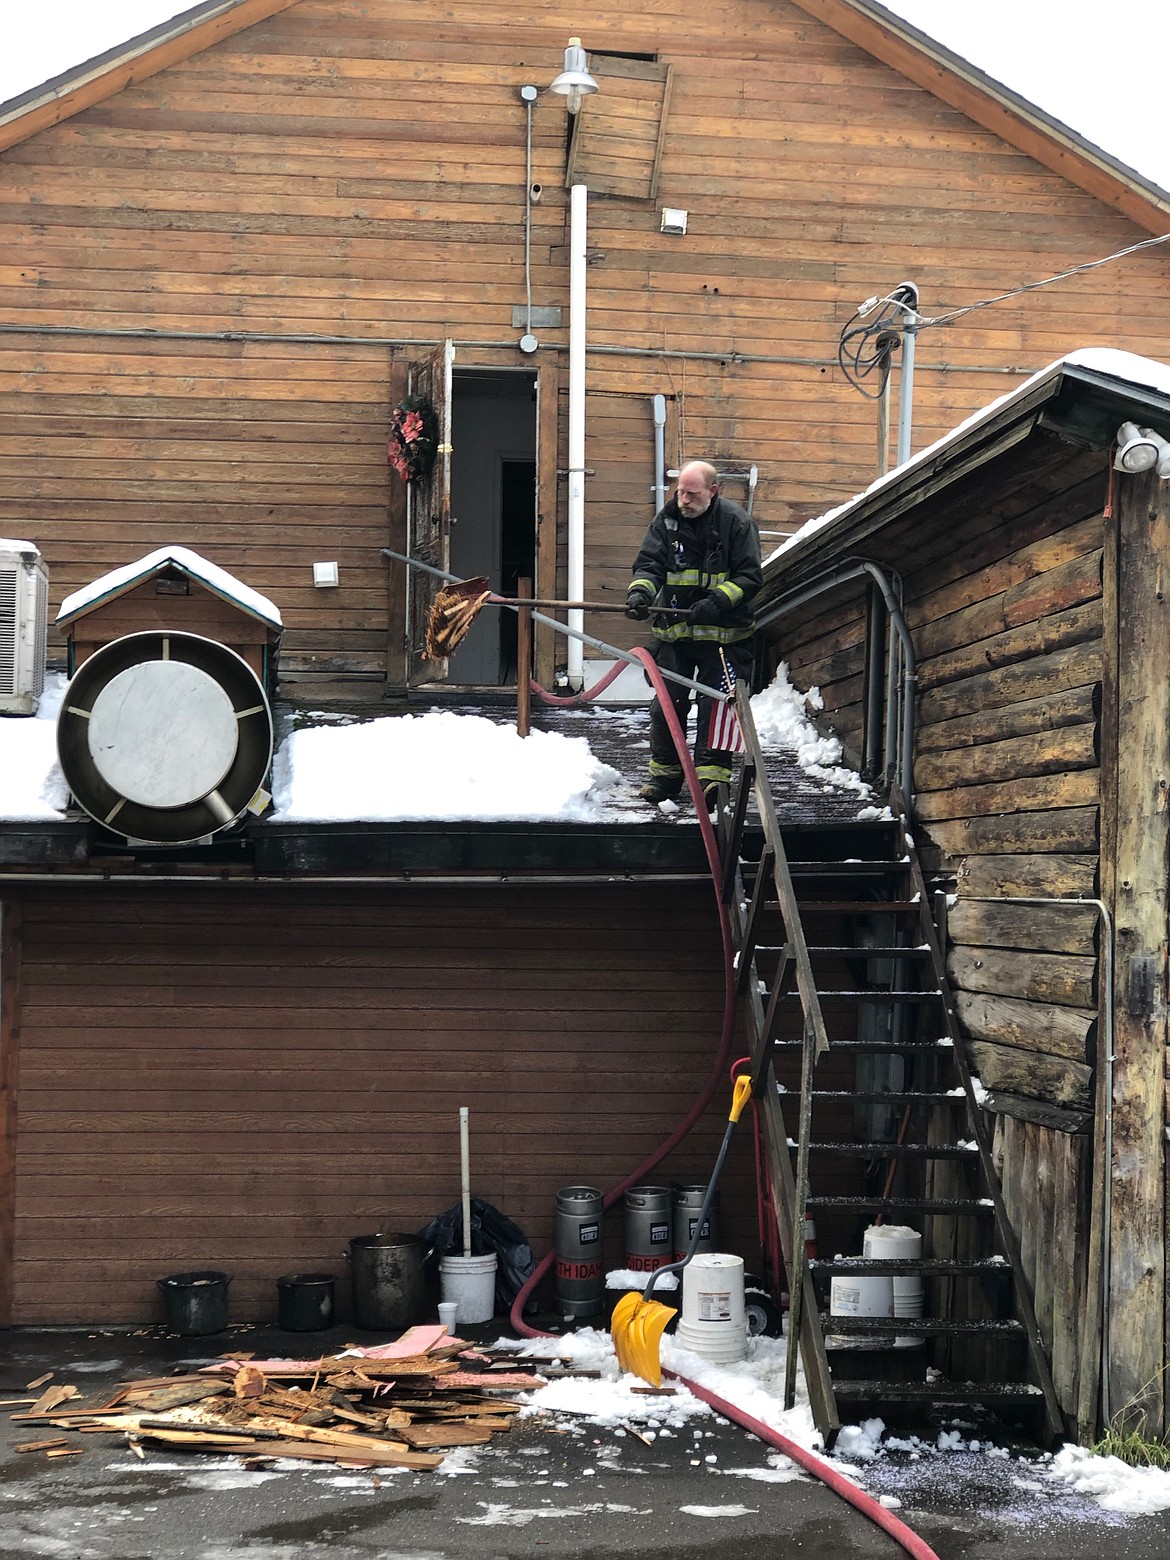 Mike North with Shoshone County Fire District No. 2 dumps a shovel's worth of debris from a small chimney fire that broke out inside the Snake Pit on New Year's Day. The fire was quickly put out and should only require a few days closure to repair some light damage.